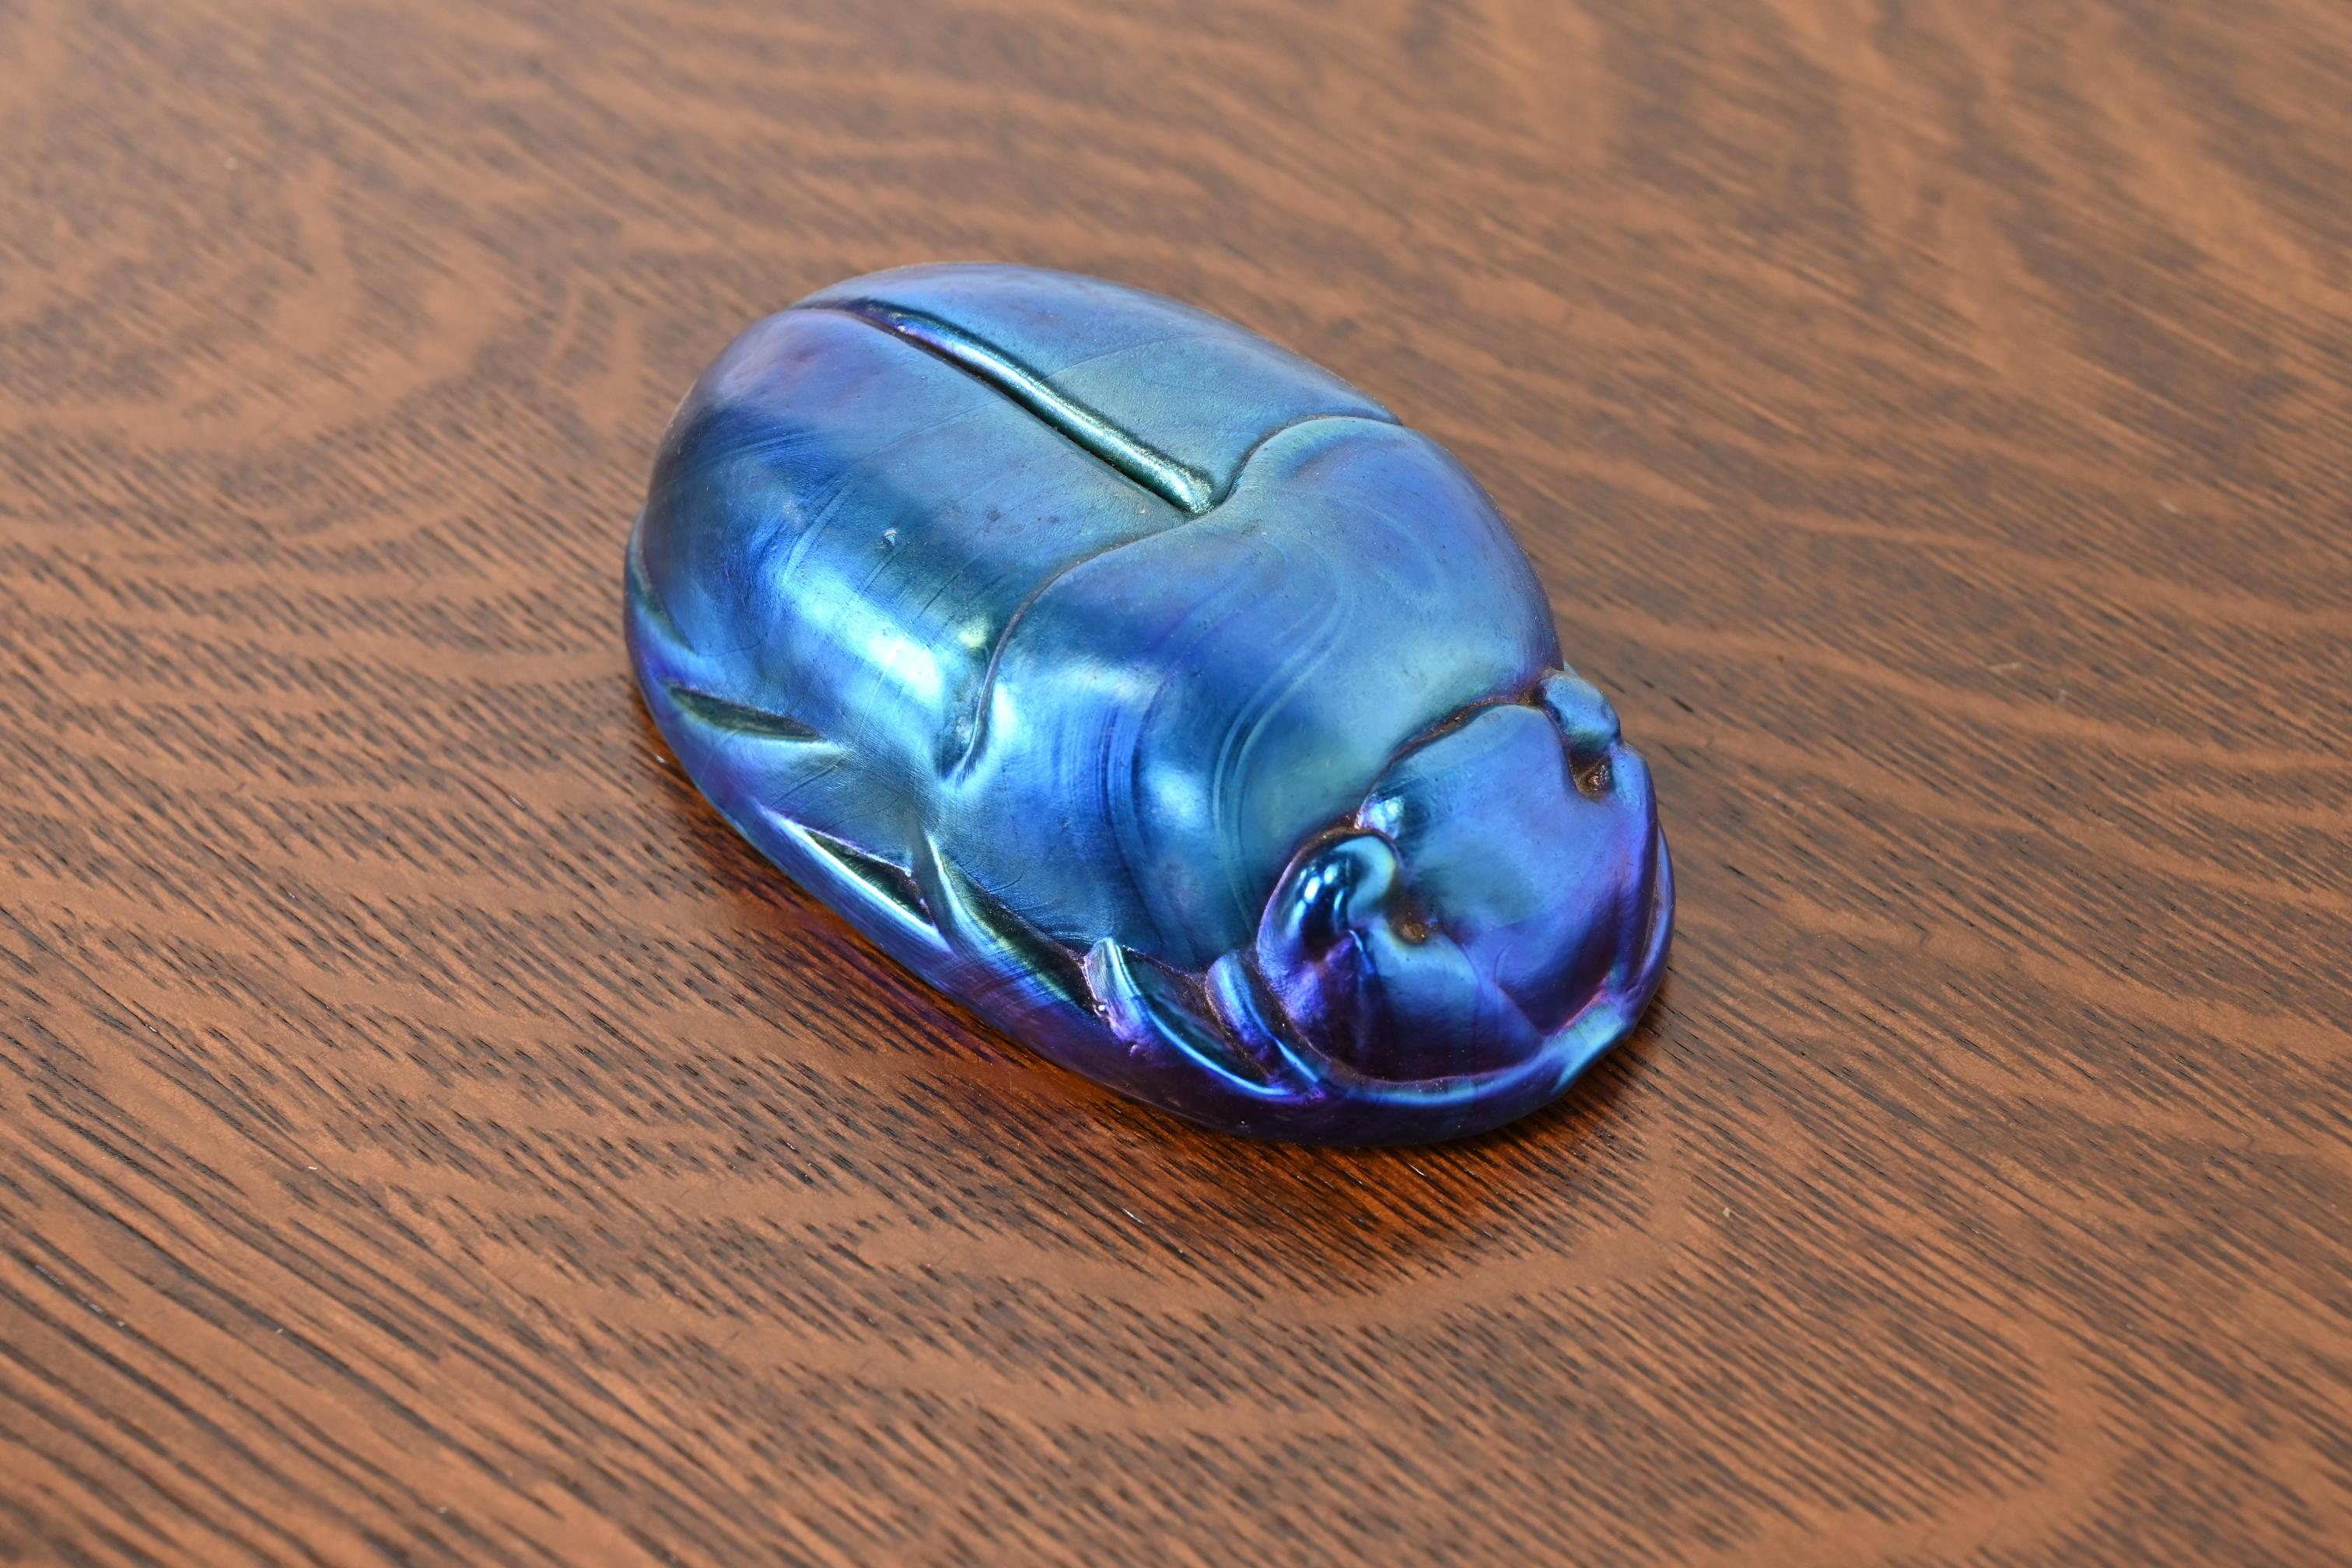 Art Deco Tiffany Studios Style Iridescent Favrile Glass Scarab Paperweight For Sale